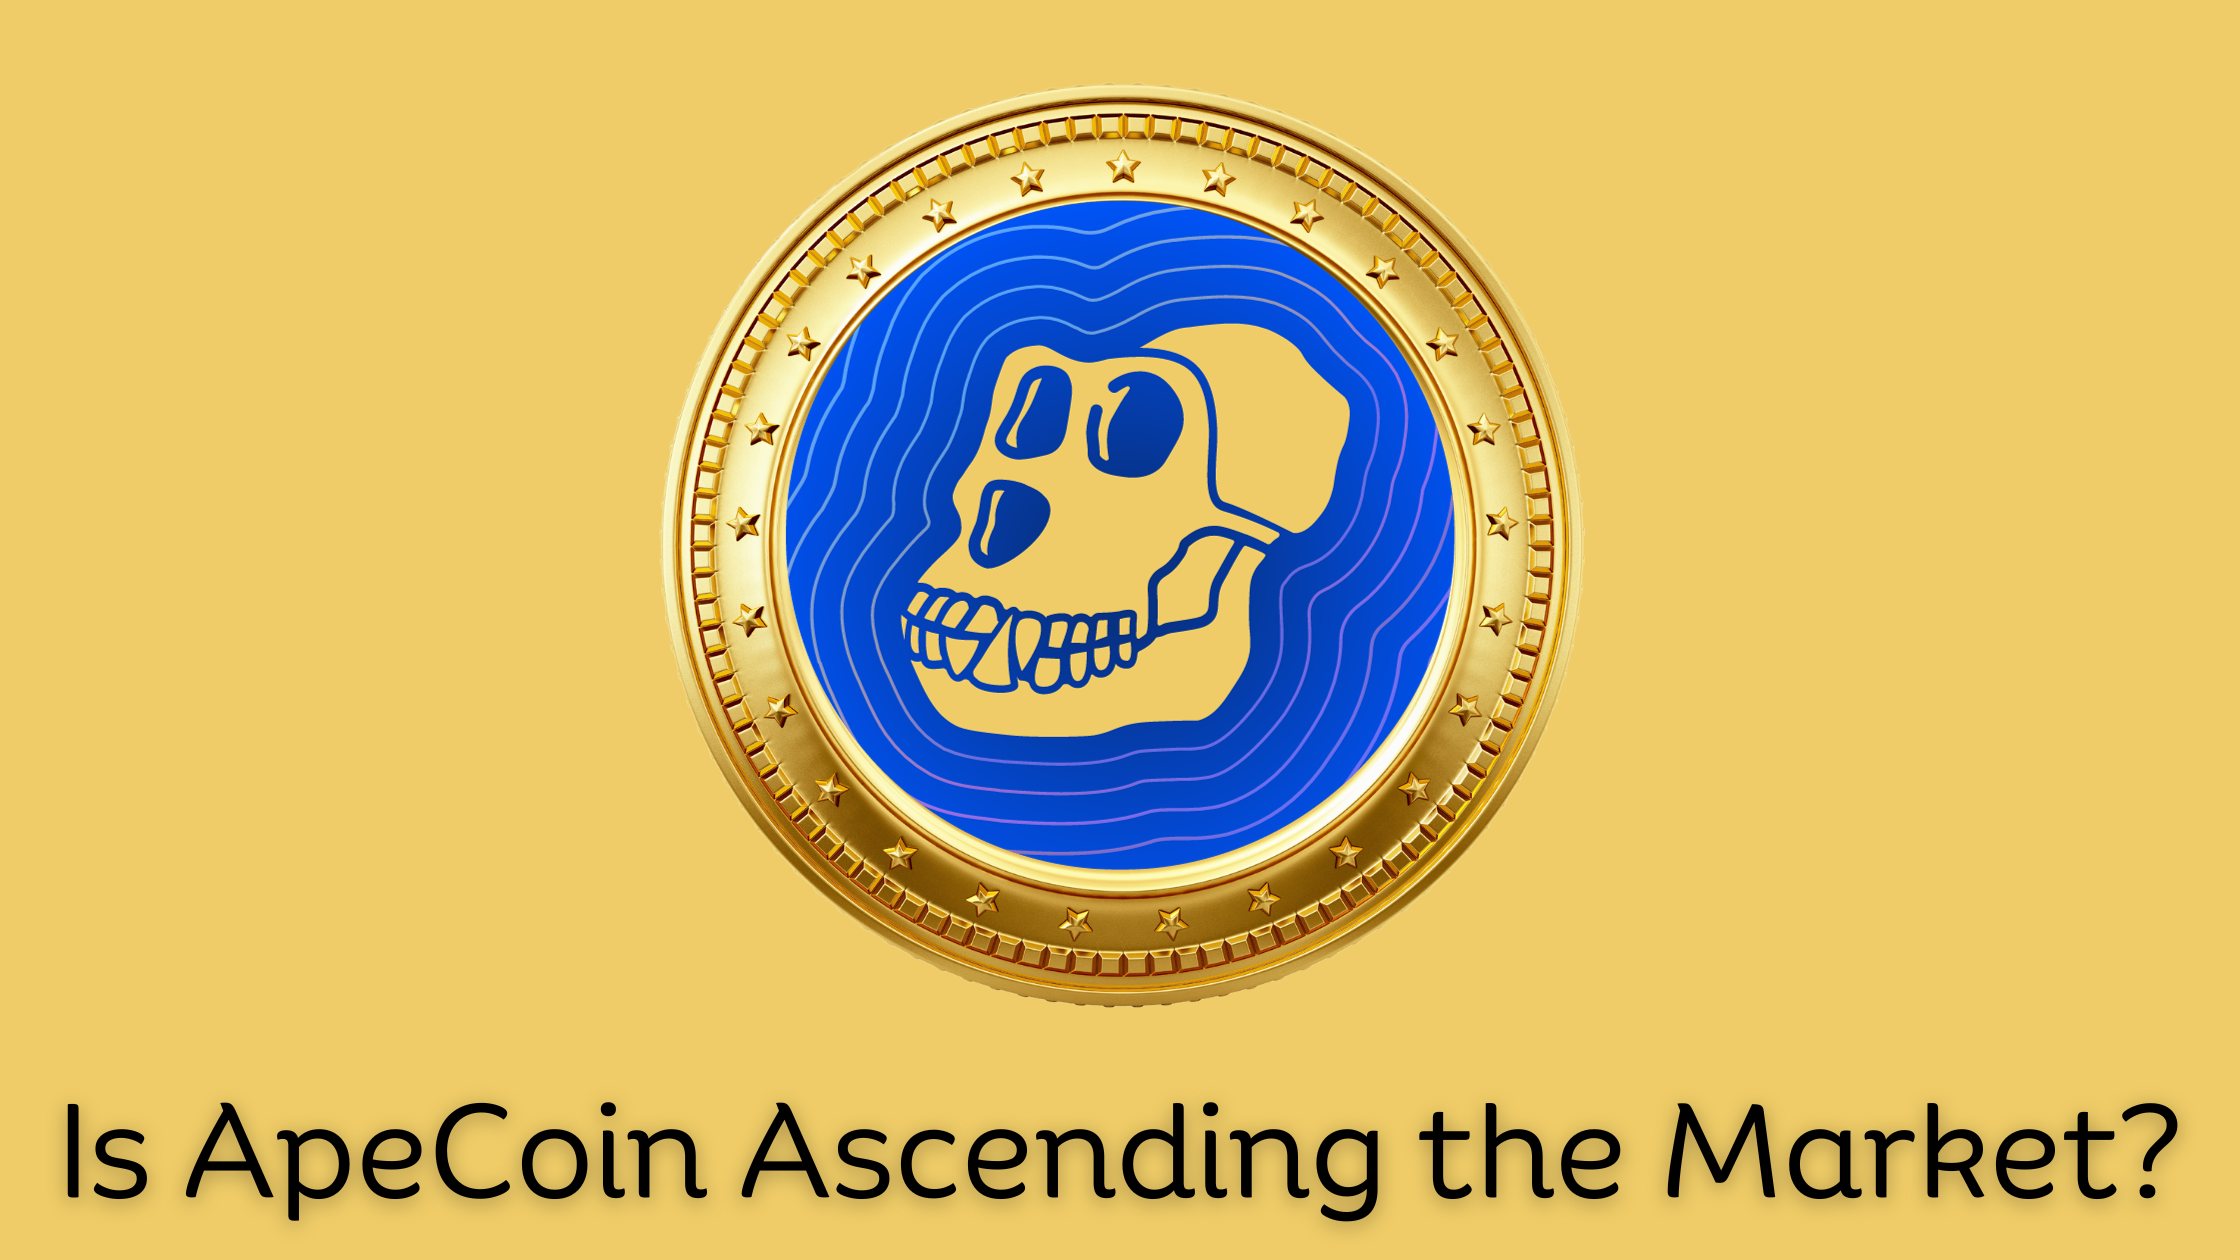 Apecoin Ascends in the Market, but Bitcoin Minetrix Might Just be the Next Big Ape in Town